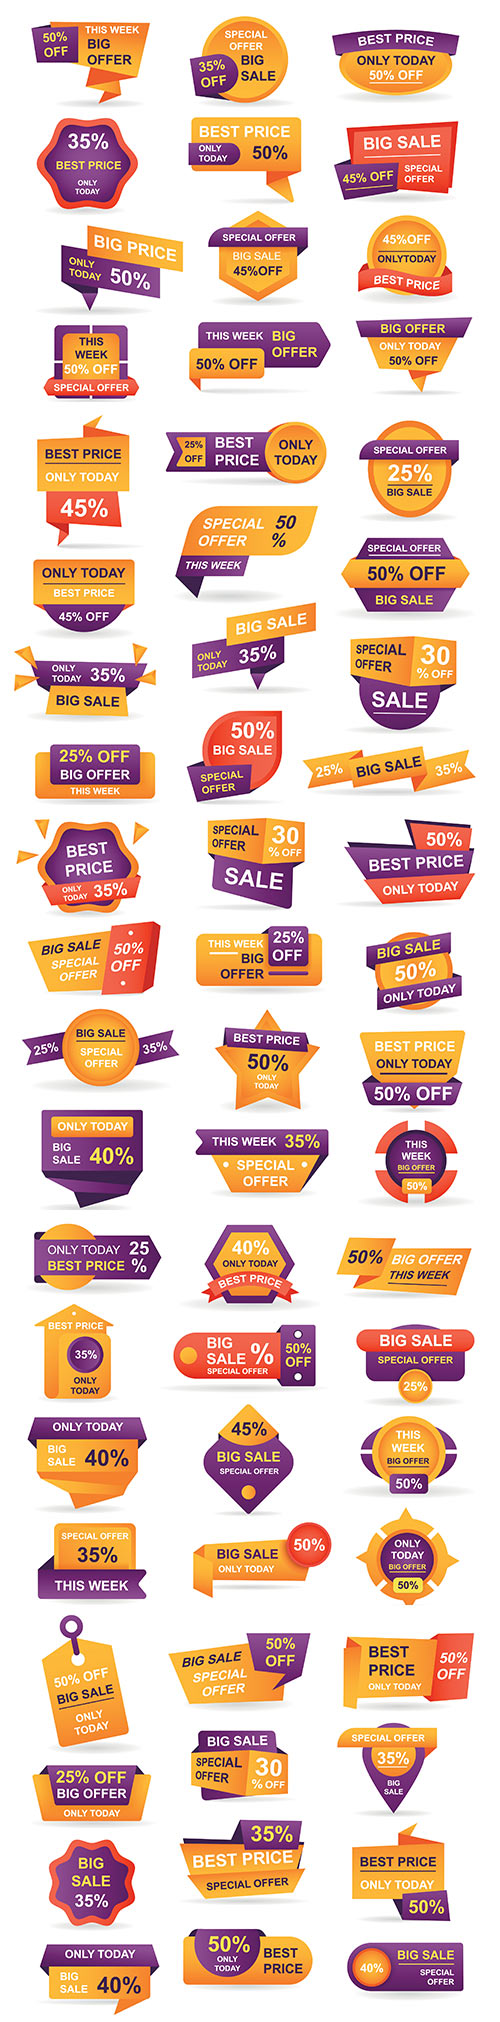 Stickers best offer price and big sale pricing tag